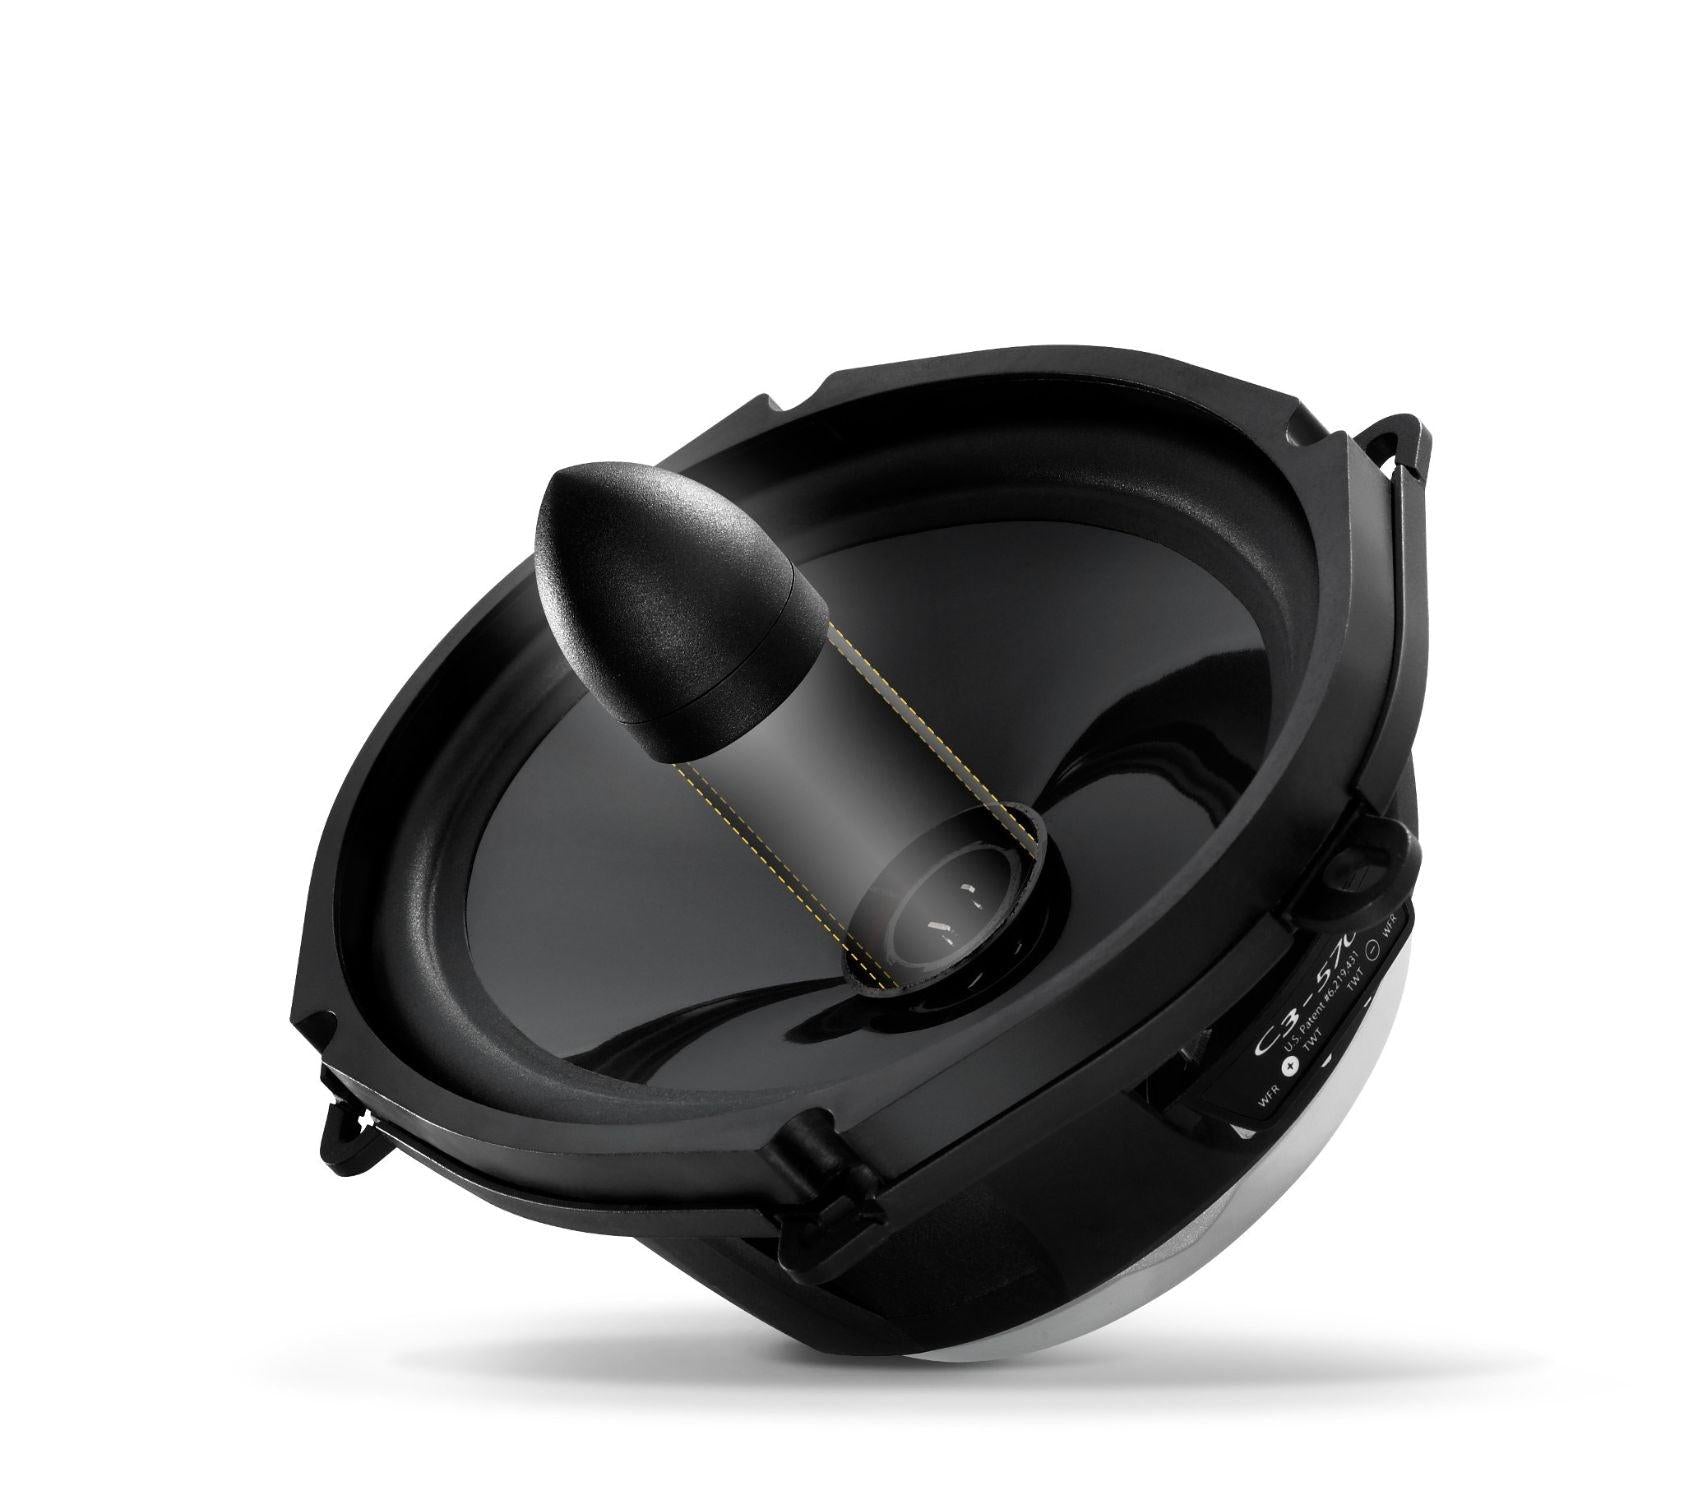 JL Audio C3-570 Convertible System with 5 x 7 / 6 x 8-inch (125 x 180mm) woofer and 1-inch (25mm) silk dome tweeter with neodymium magnet, programmable outboard crossover network.